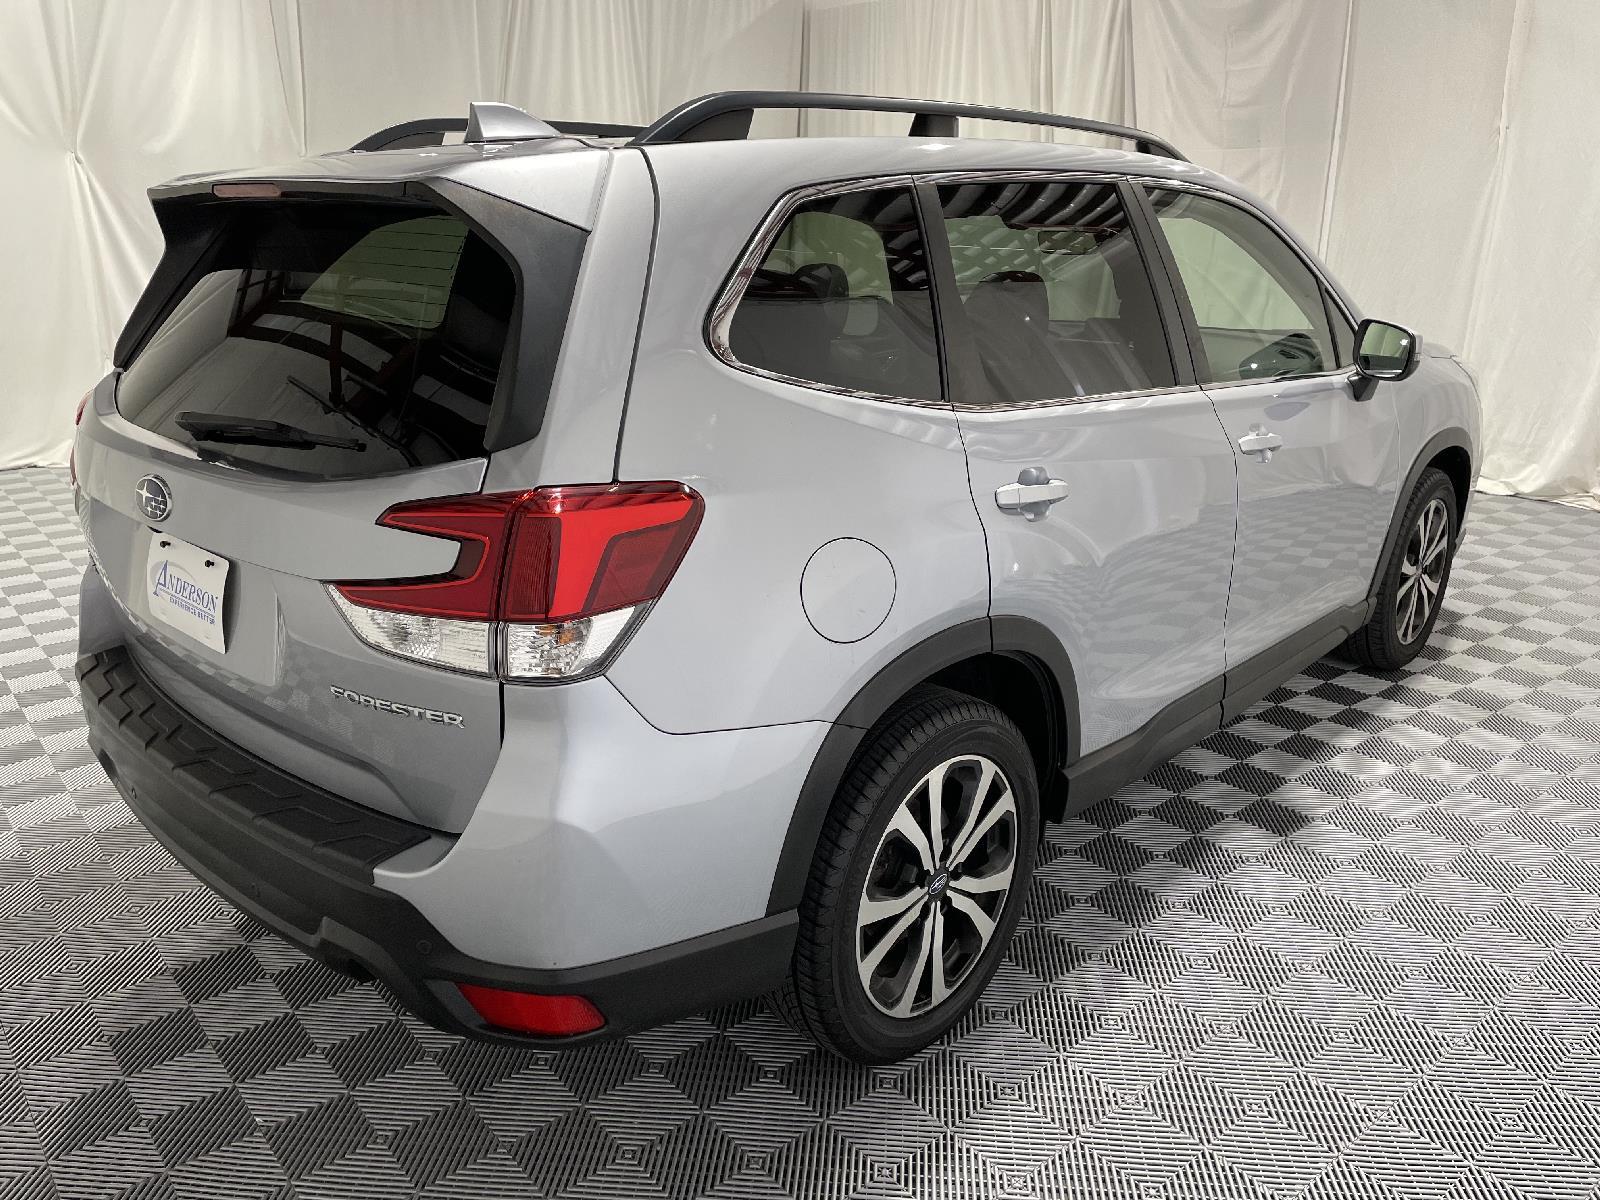 Used 2019 Subaru Forester Limited SUV for sale in St Joseph MO